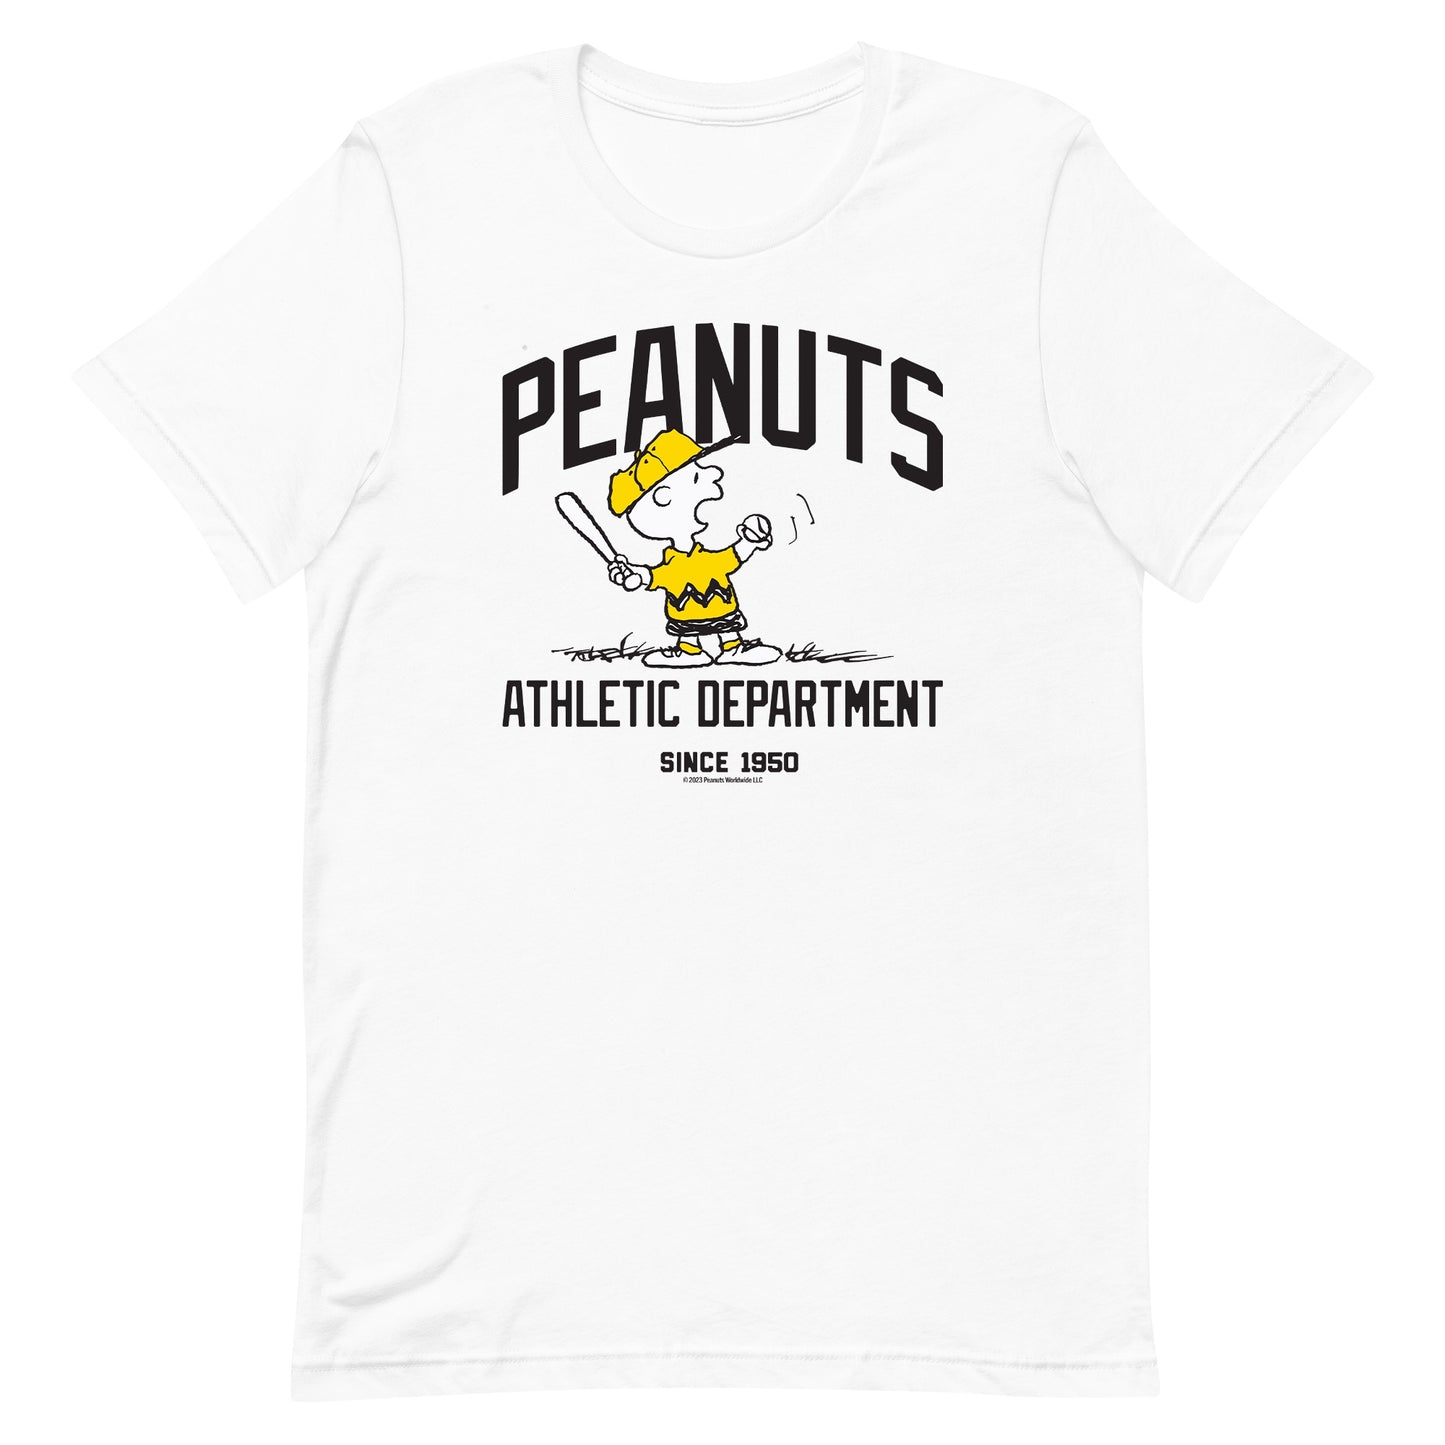 Choose Your Favorite Character Peanuts Athletic Department Customized Adult T-Shirt